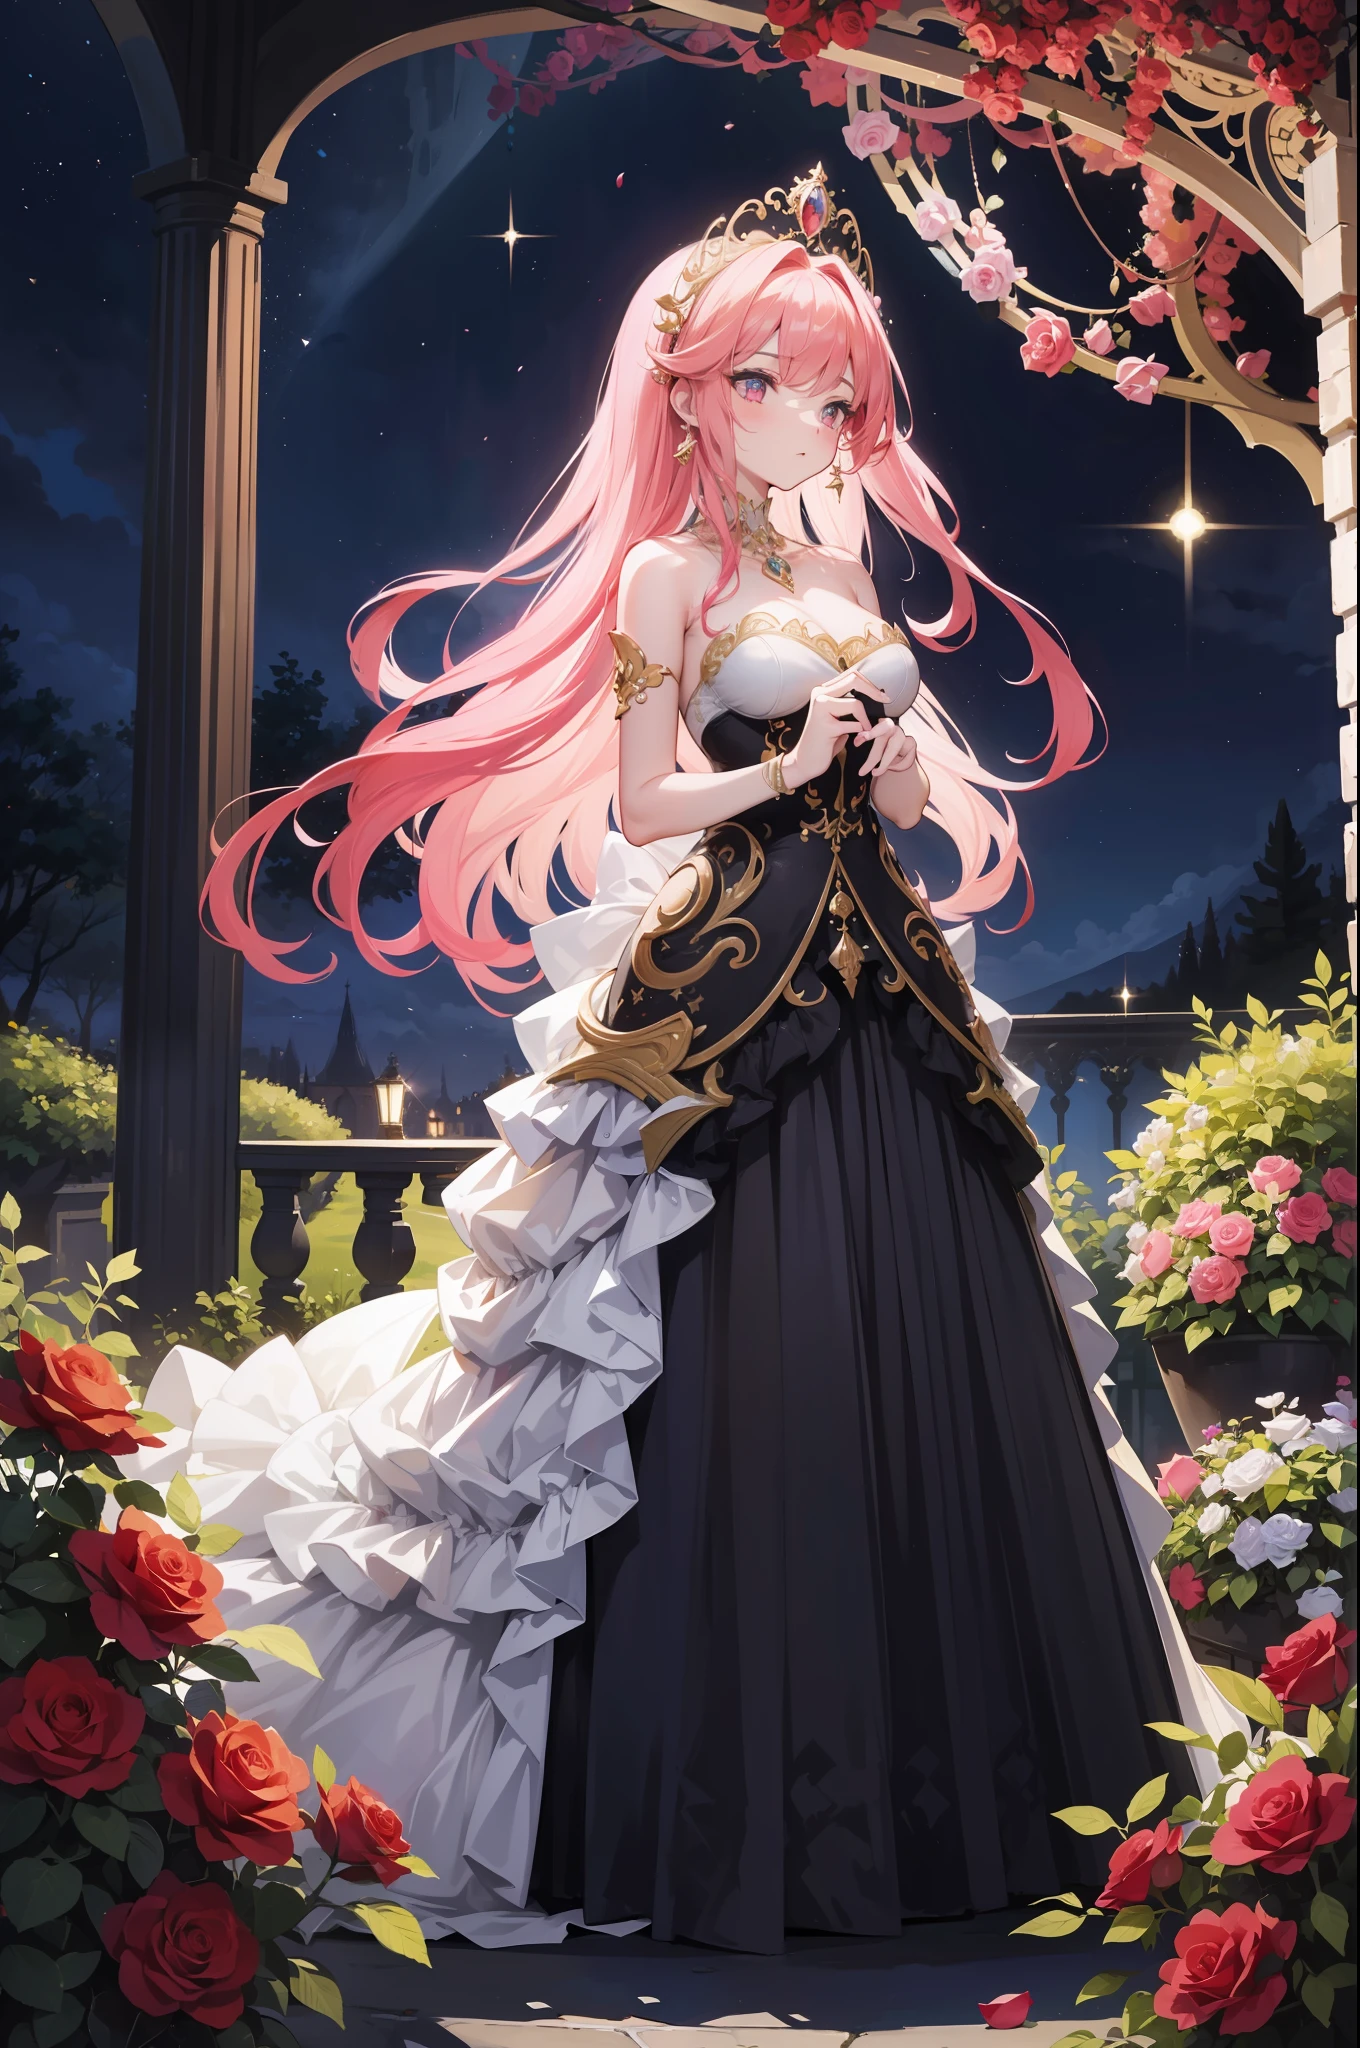 The most beautiful rose bush imaginable and an incredibly elegant young woman, magnificently coiffed, spectacularly made up and wearing a dazzlingly fabulous dress. In a dreamlike garden on a magical evening. (obra maestra) (mejor calidad)